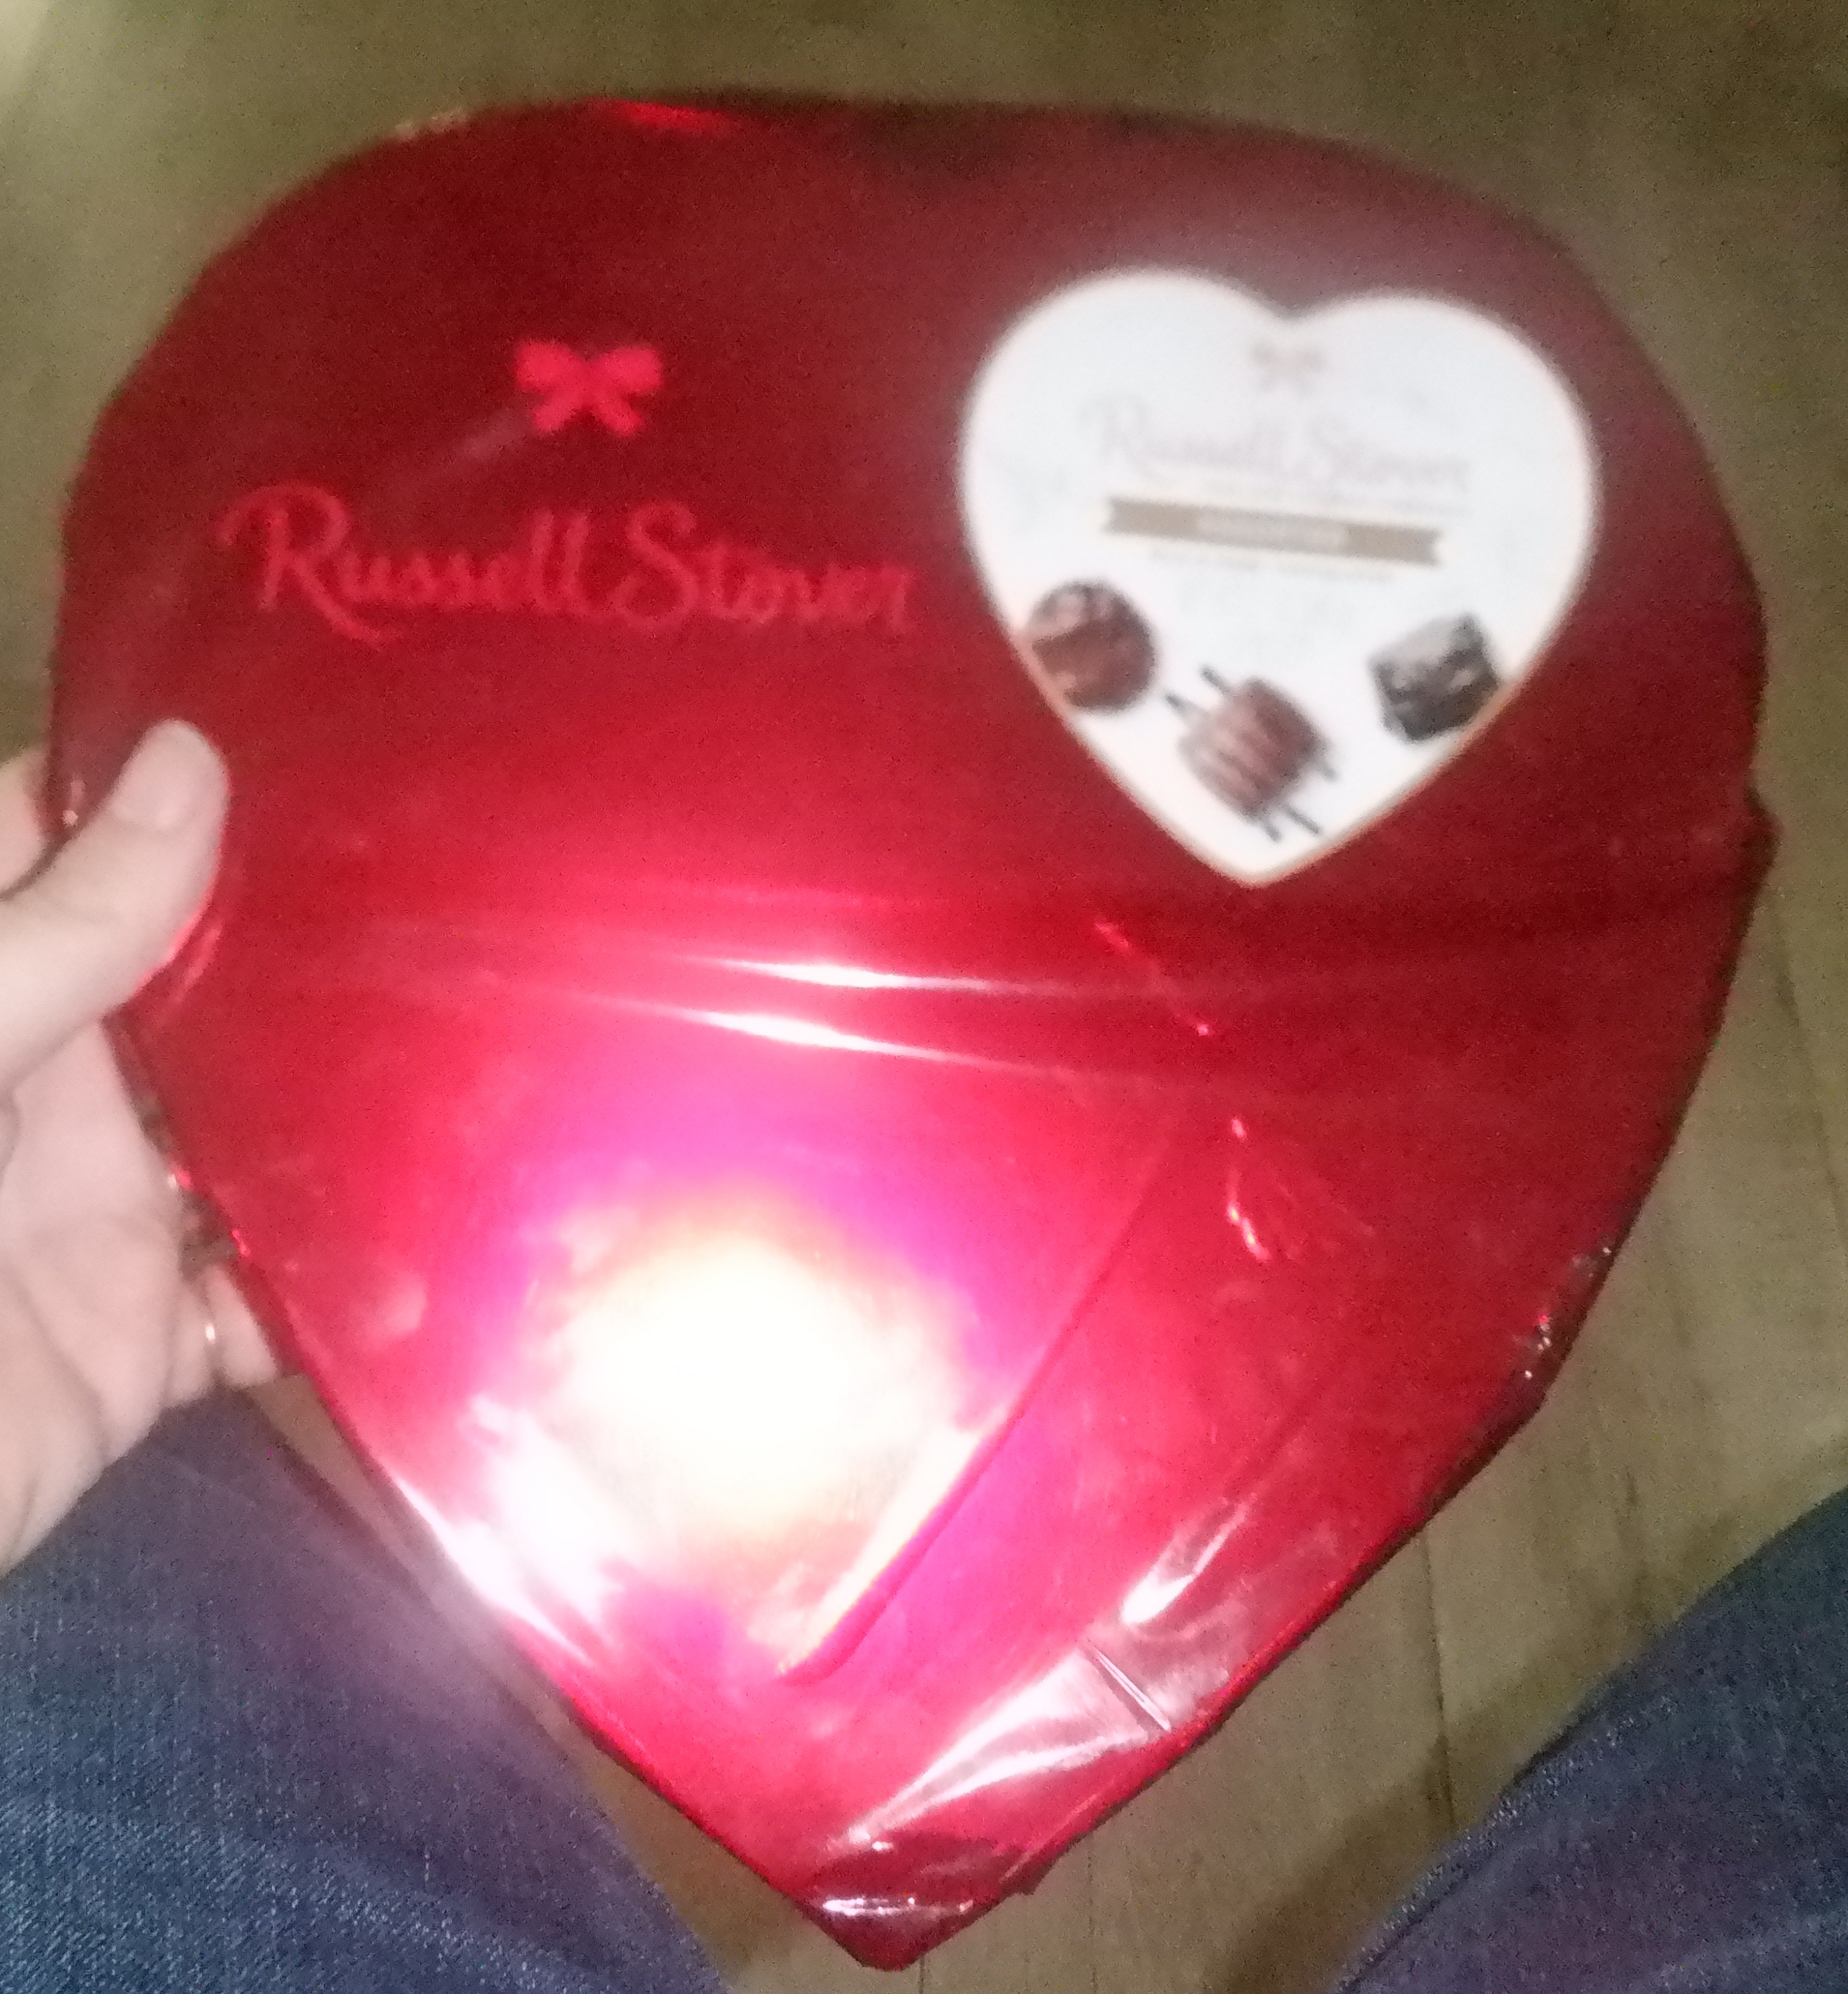 Chocolates my boss gave me today